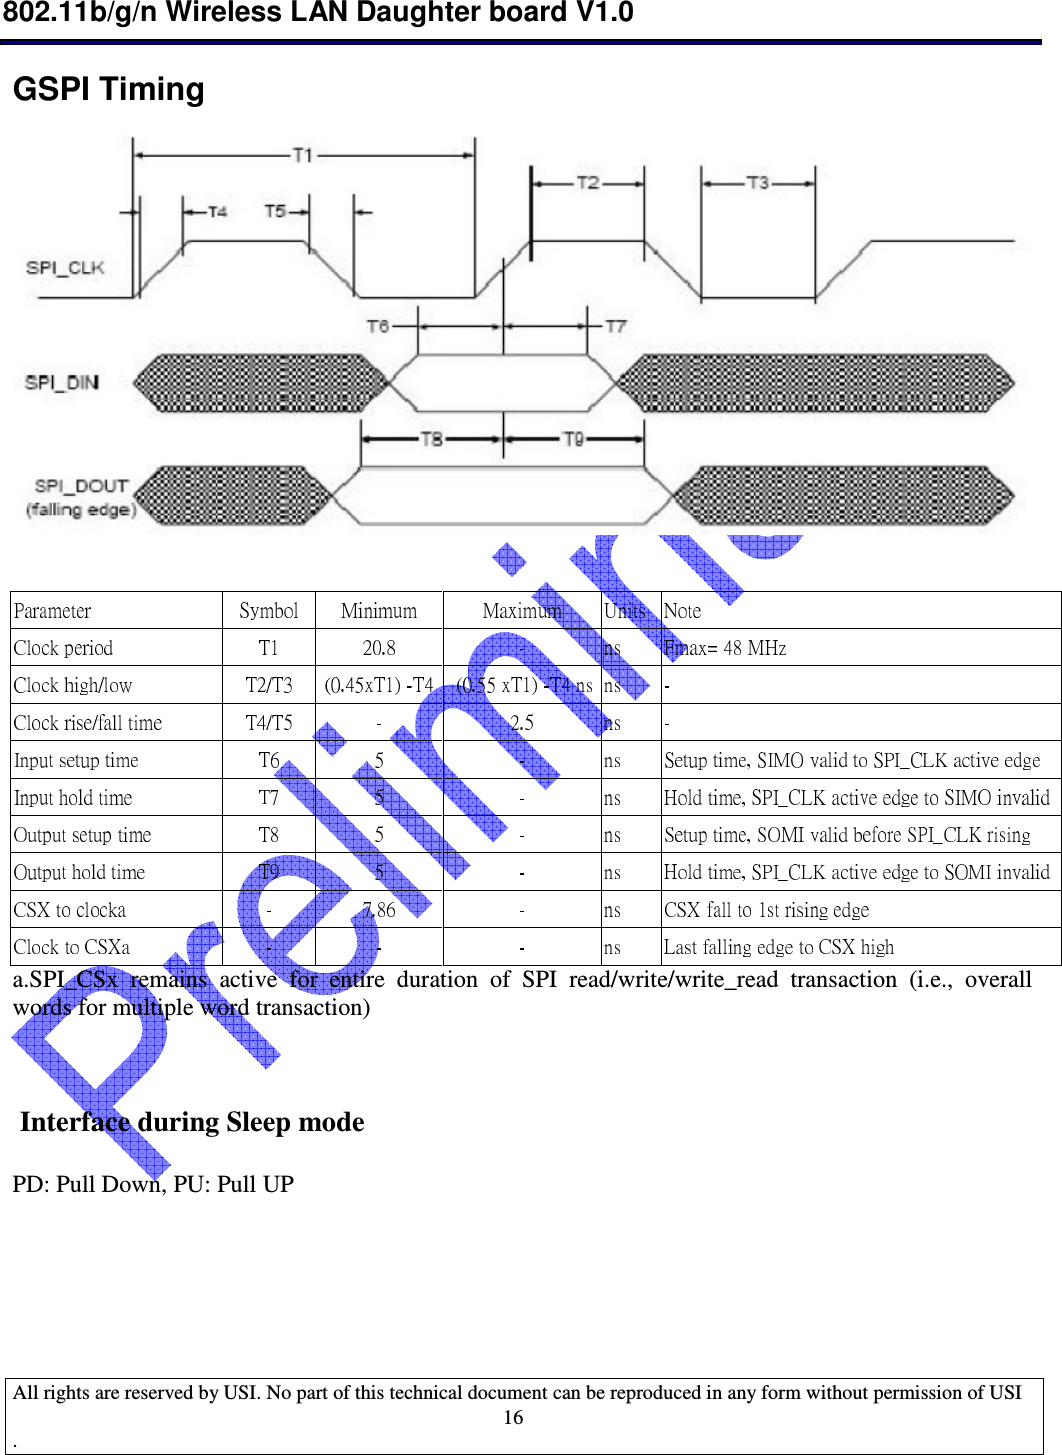  802.11b/g/n Wireless LAN Daughter board V1.0  All rights are reserved by USI. No part of this technical document can be reproduced in any form without permission of USI .                                    16GSPI Timing     a.SPI_CSx  remains  active  for  entire  duration  of  SPI  read/write/write_read  transaction  (i.e.,  overall words for multiple word transaction)     Interface during Sleep mode  PD: Pull Down, PU: Pull UP   